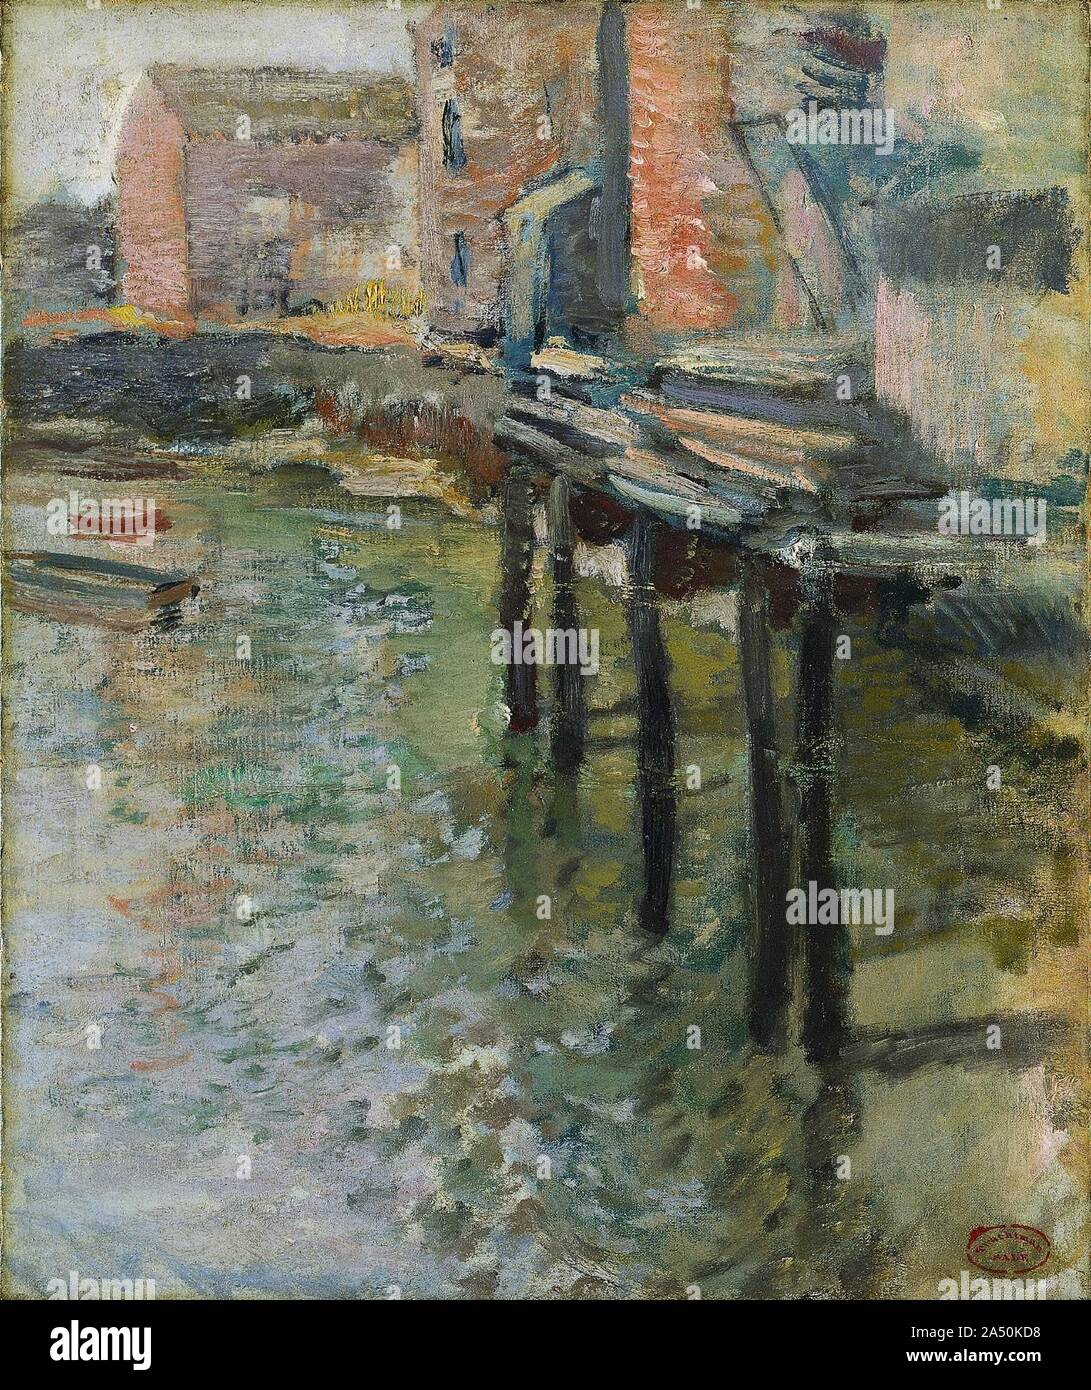 Deserted Wharf (The Old Mill at Cos Cob), c.1900-1902. In 1892, John Twachtman, one of the most imaginative of the American Impressionists, established a summer colony at Cos Cob, Connecticut. This painting depicts the Holley Mill near Cos Cob. Unlike the French Impressionists, who tended to analyze the effects of light and colour in a scene, Twachtman was interested in expressing the pure poetry of colour and his emotional response to the changes he observed in nature. Stock Photo